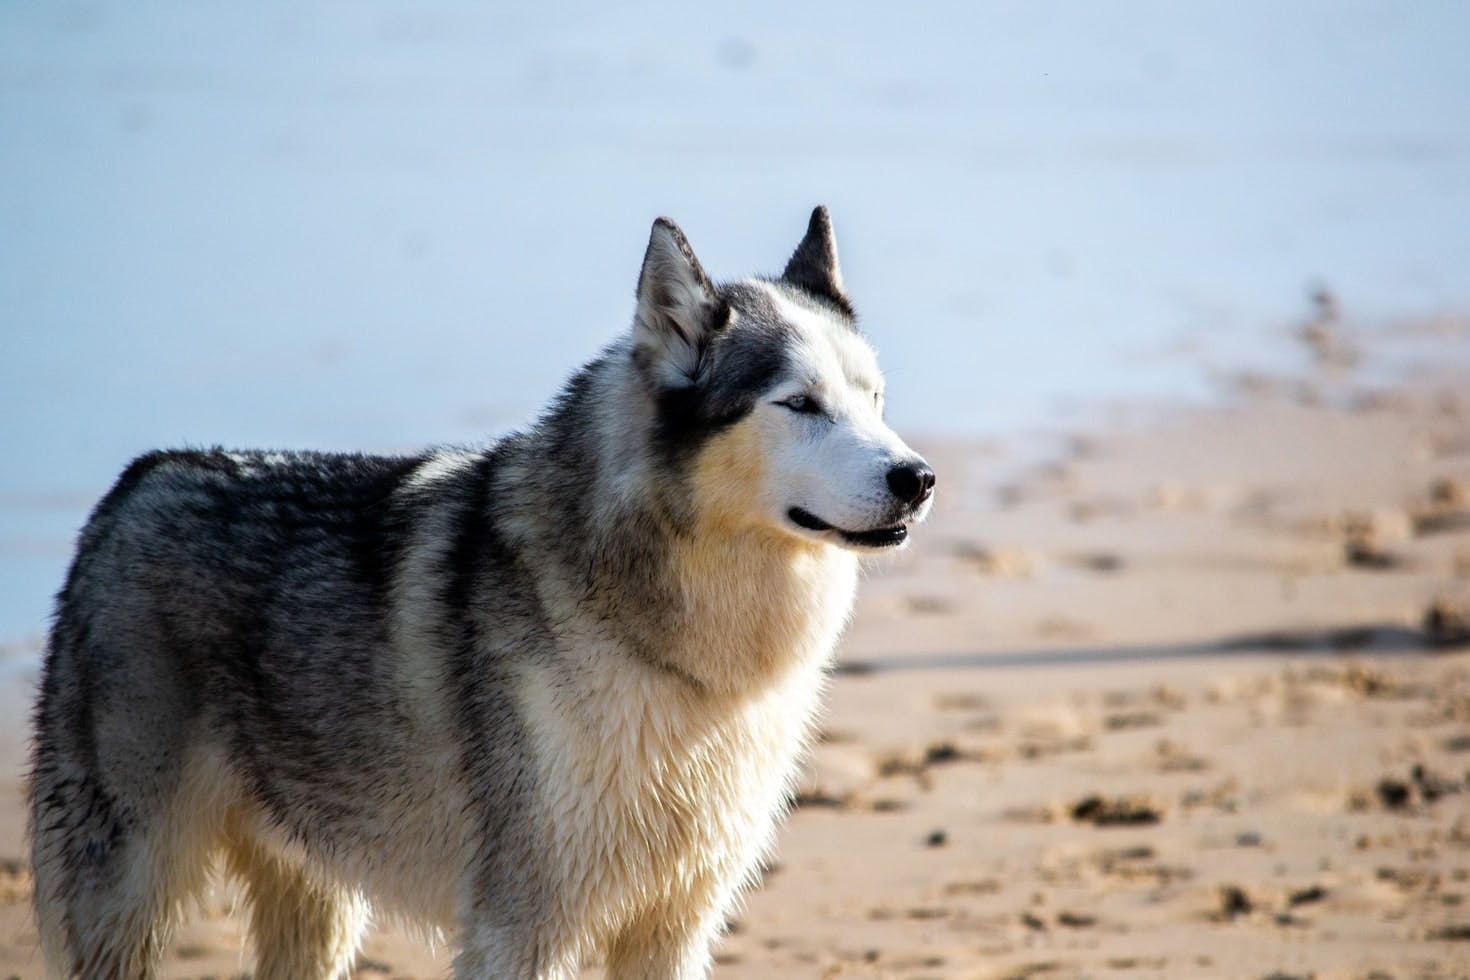 A black and white husky dog standing on a beach, looking contemplative.